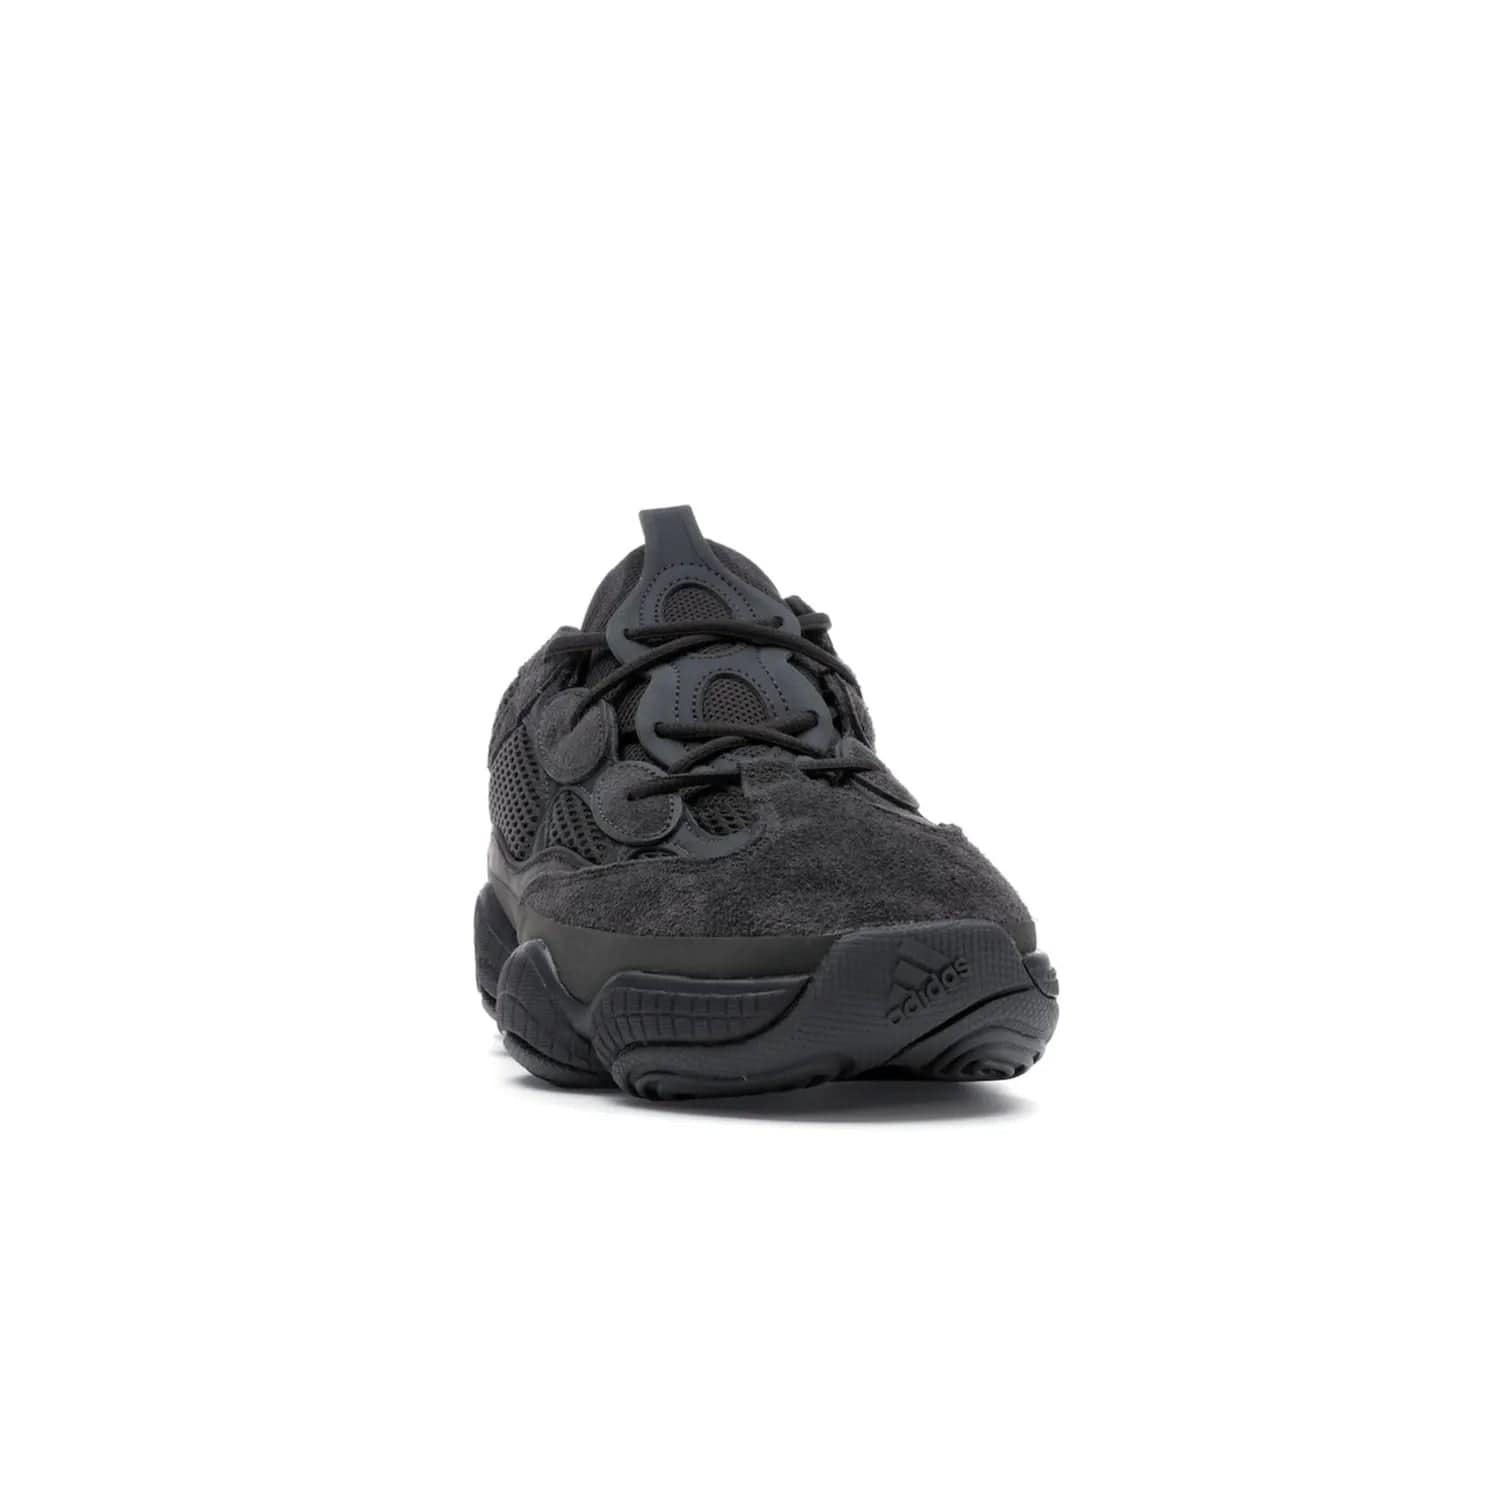 adidas Yeezy 500 Utility Black - Image 9 - Only at www.BallersClubKickz.com - Iconic adidas Yeezy 500 Utility Black in All-Black colorway. Durable black mesh and suede upper with adiPRENE® sole delivers comfort and support. Be unstoppable with the Yeezy 500 Utility Black. Released July 2018.